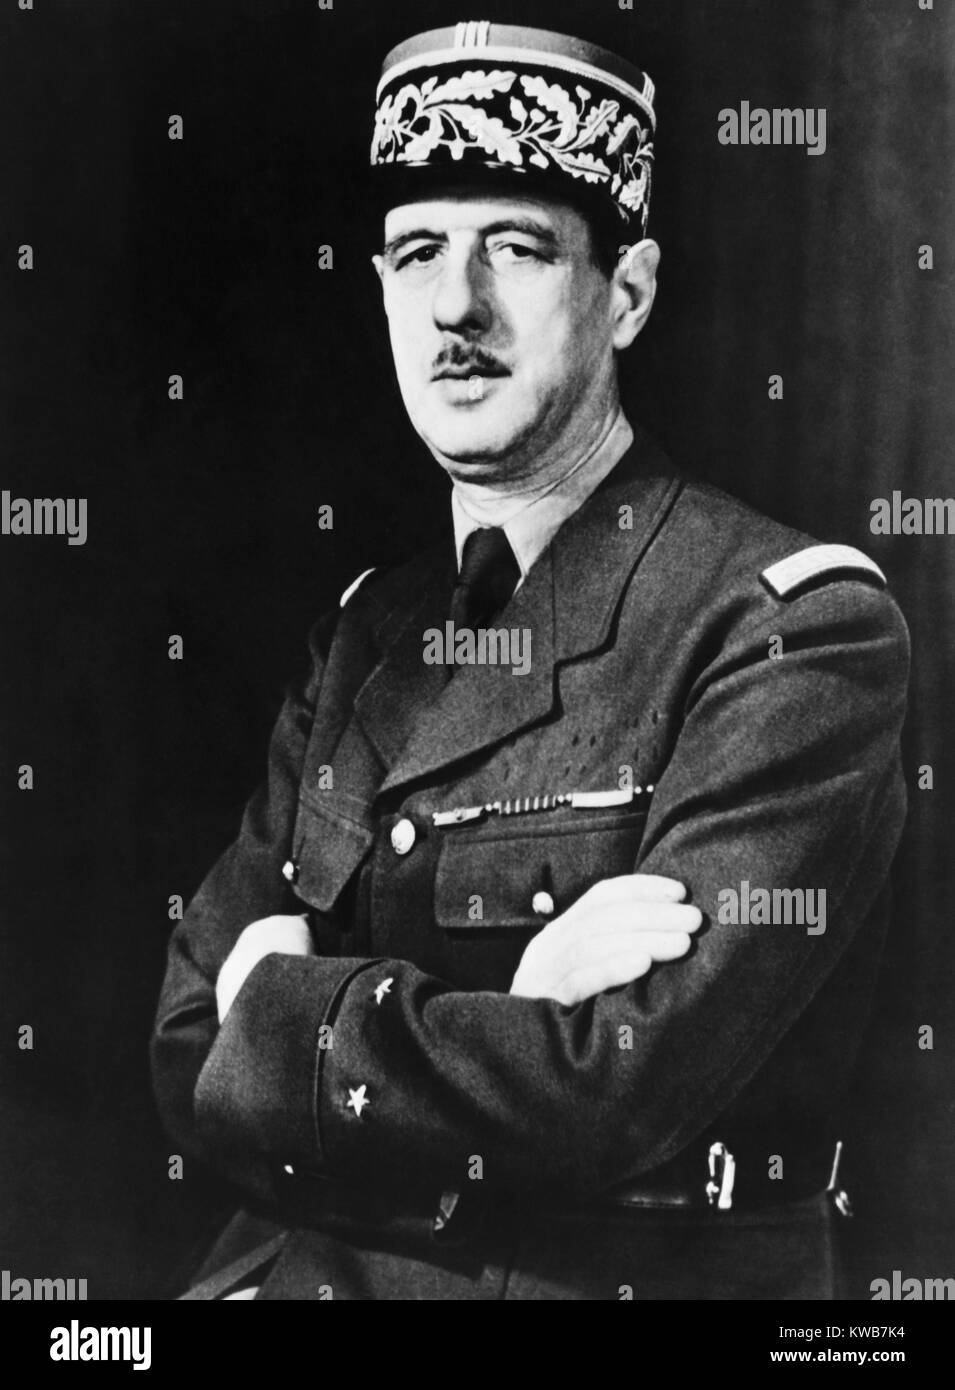 Charles de Gaulle in exile in Britain during World War 2. He resisted the German occupiers, the Vichy collaborators, and fought for French interests throughout World War 2. (BSLOC 2014 8 142) Stock Photo